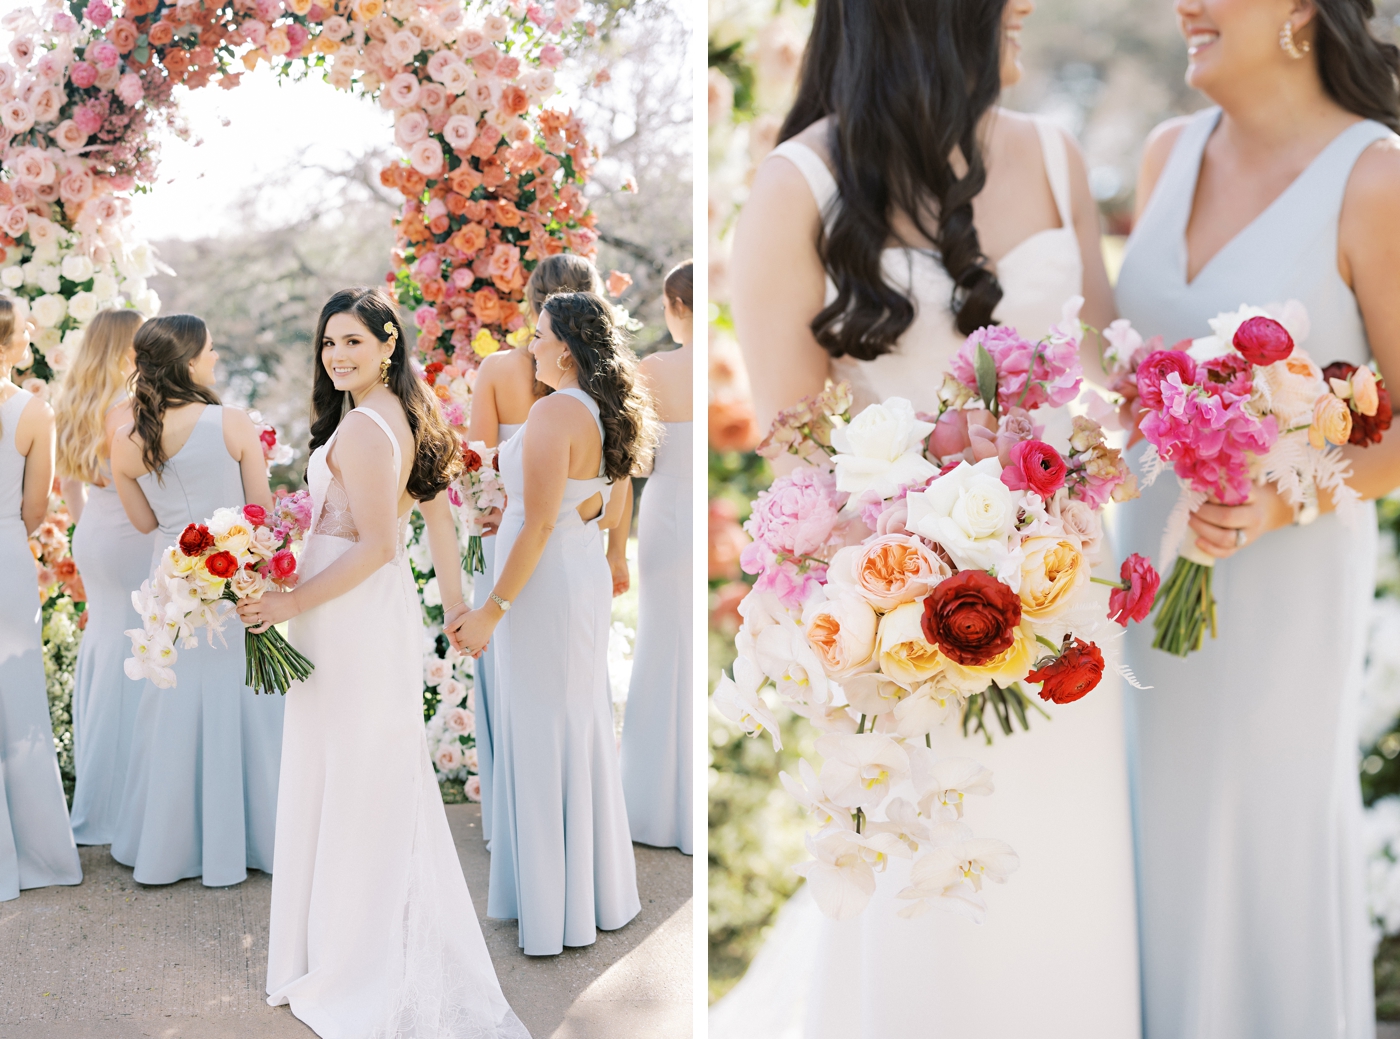 Dusty blue bridesmaids dresses for a winter wedding in Austin, Texas